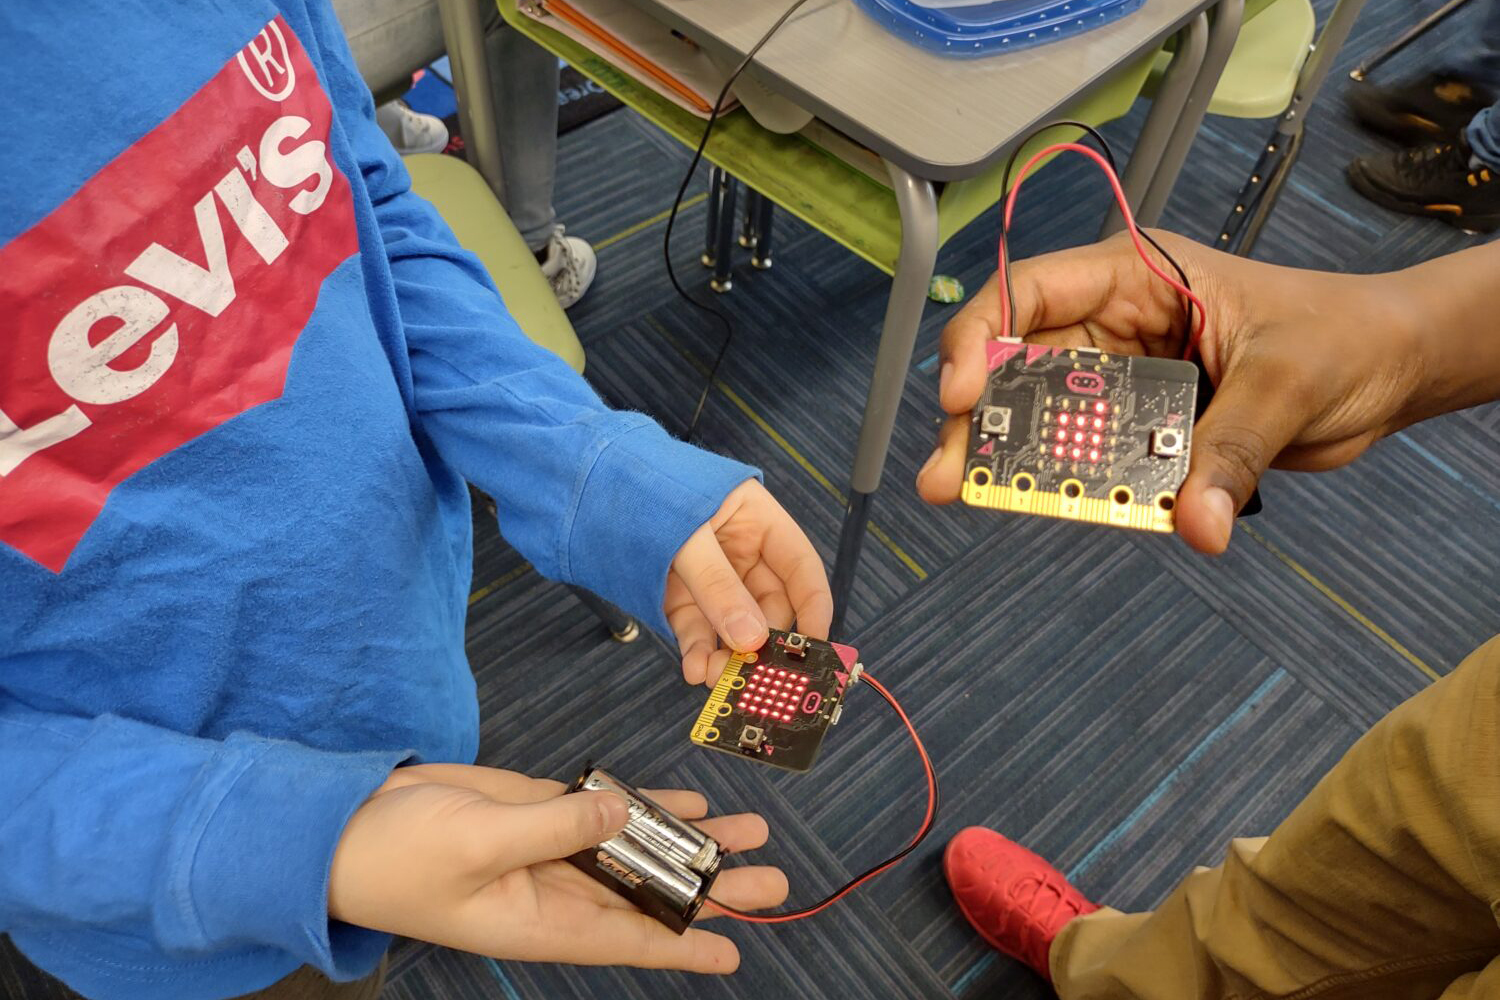 A student working with circuits as part of the CMU STEAM Outreach program